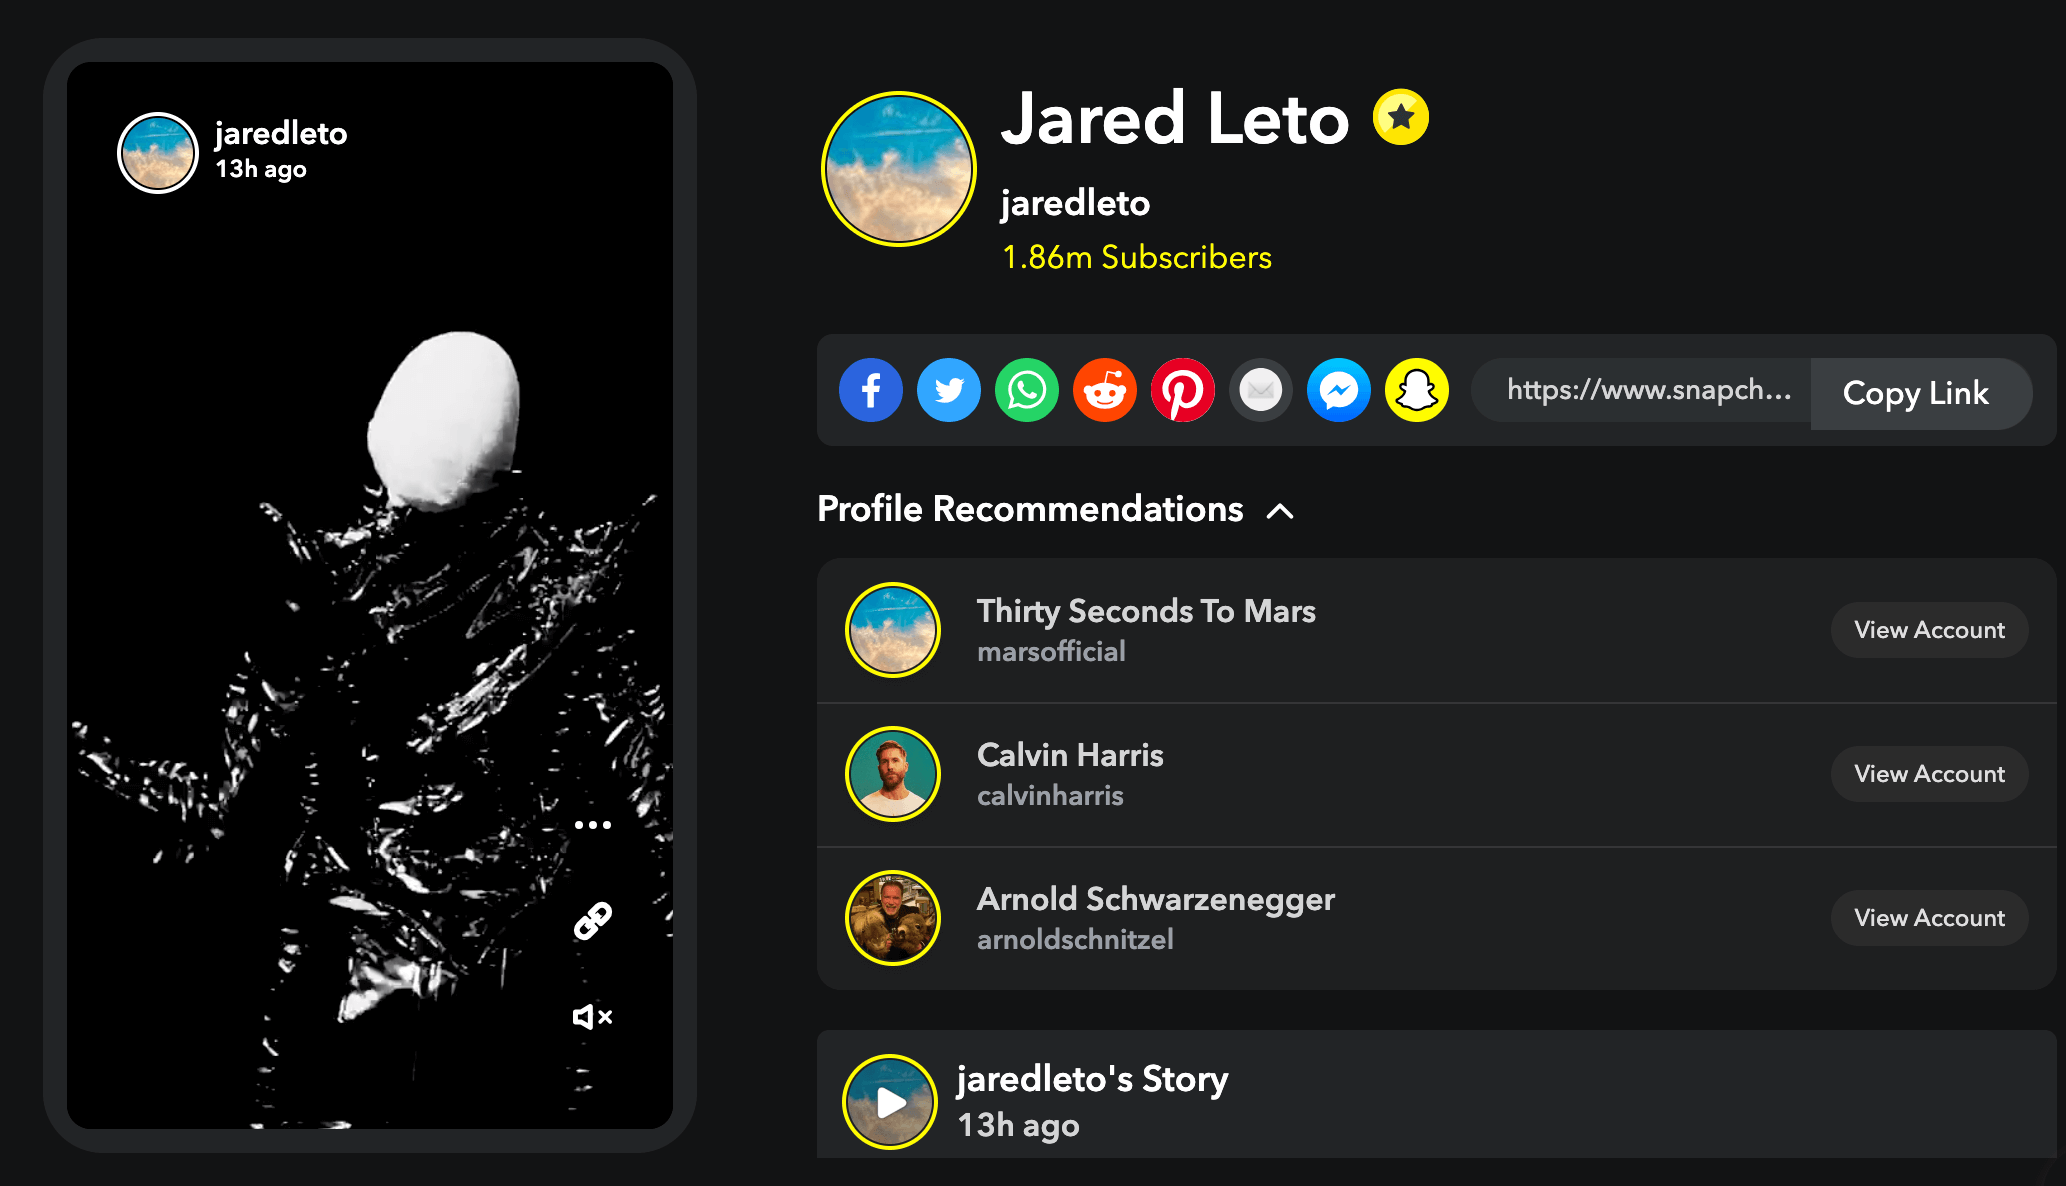 jared-leto-snap.png